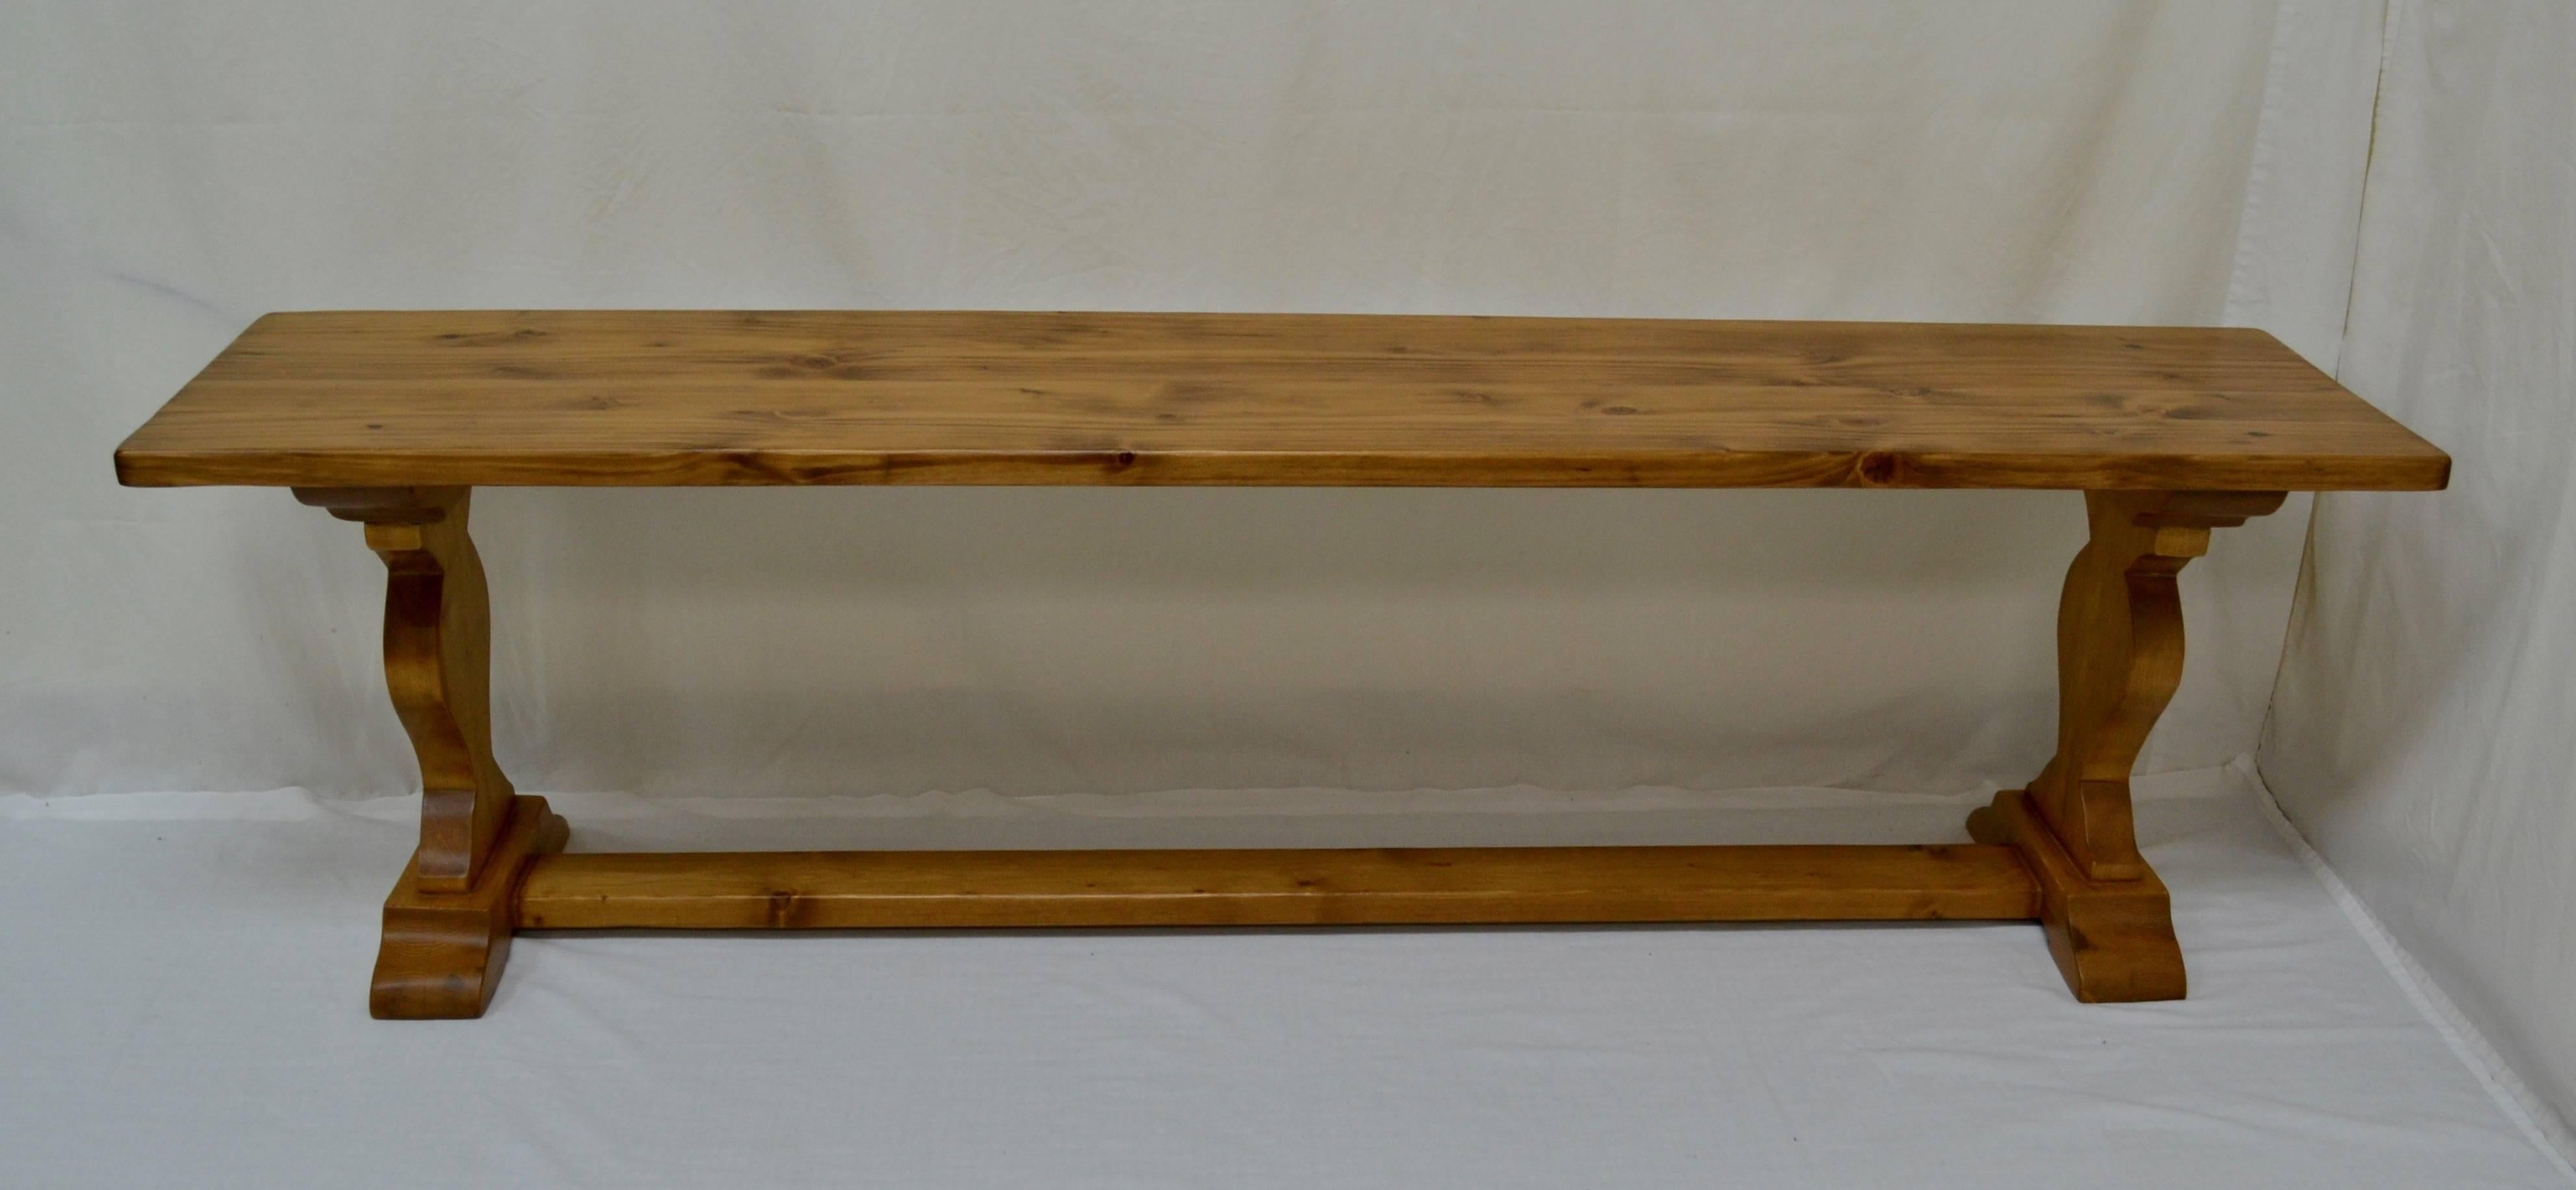 This is an attractive and sturdy pine refectory-style bench or form. The trestle ends are joined by a stretcher at floor level, between the sledge-style feet. In medium pine stain with a wipe-off satin lacquer finish.

